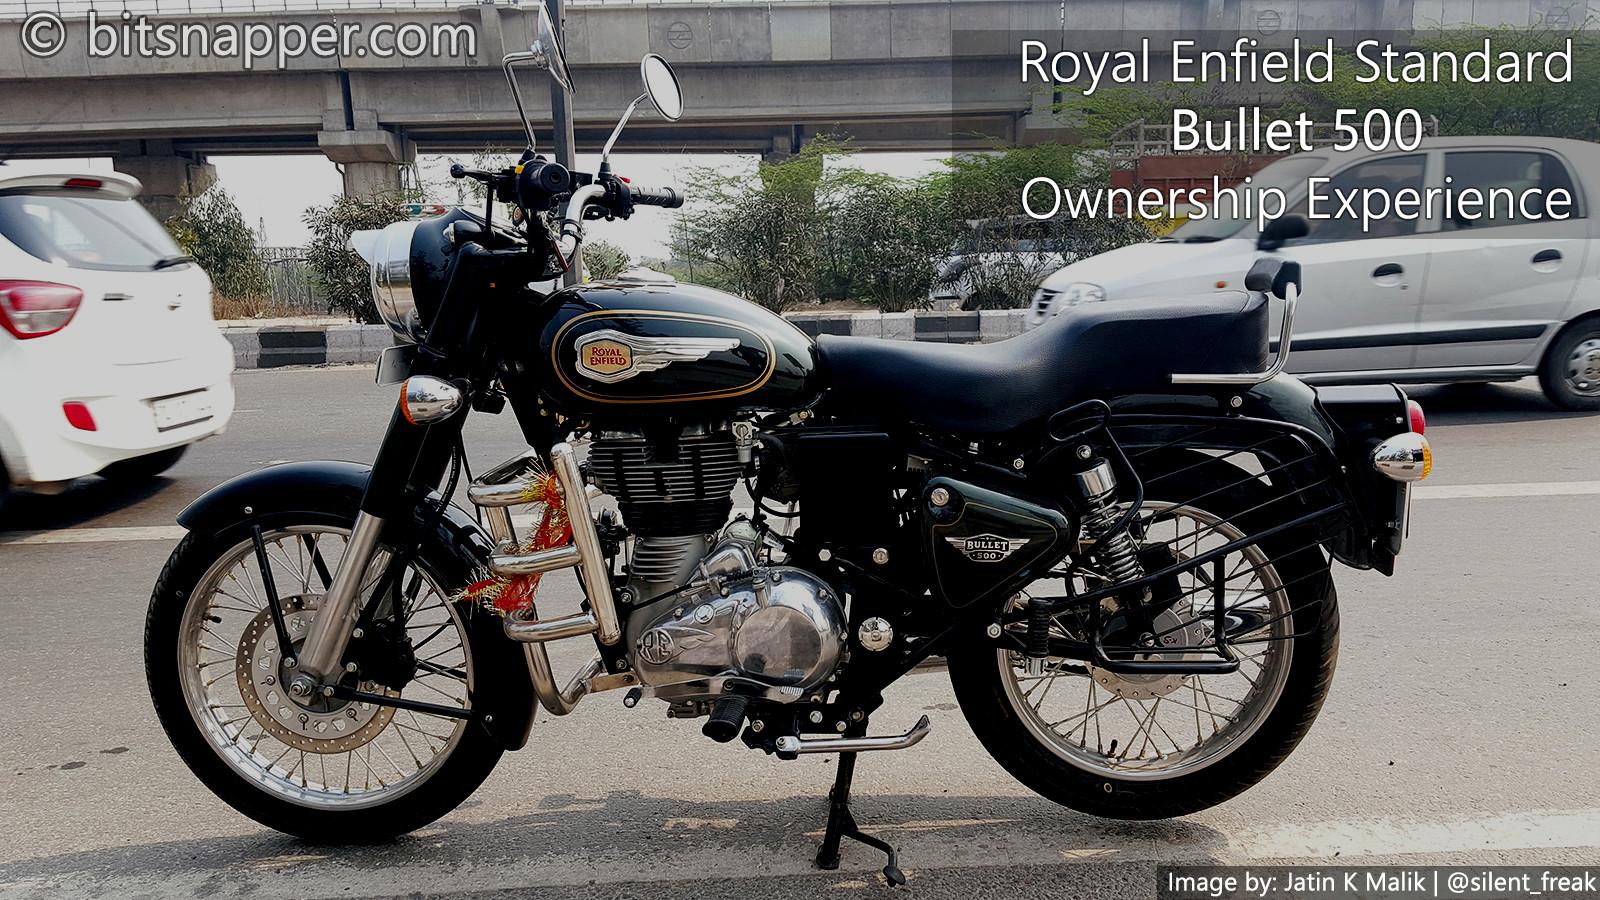 Royal Enfield Standard Bullet 500 Ownership Experience